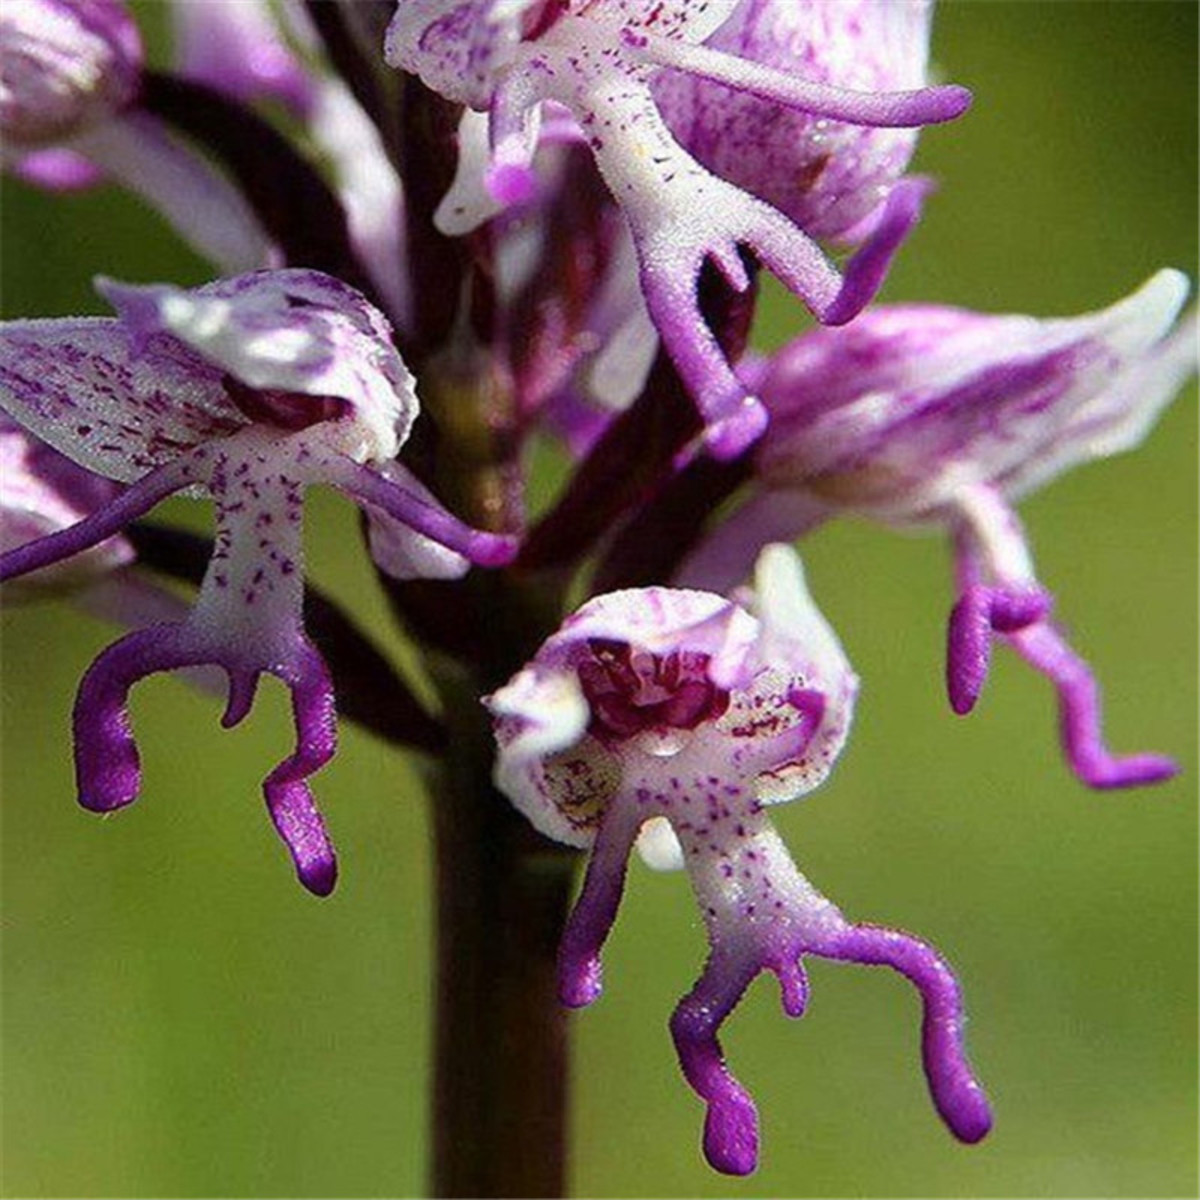 These flowers are called naked man orchids and they are native to the Mediterranean areas and regions like Jordan, Turkey, Italy, Portugal, Spain, Israel, Greece, but currently there are no sellers who are shipping them to the United States.